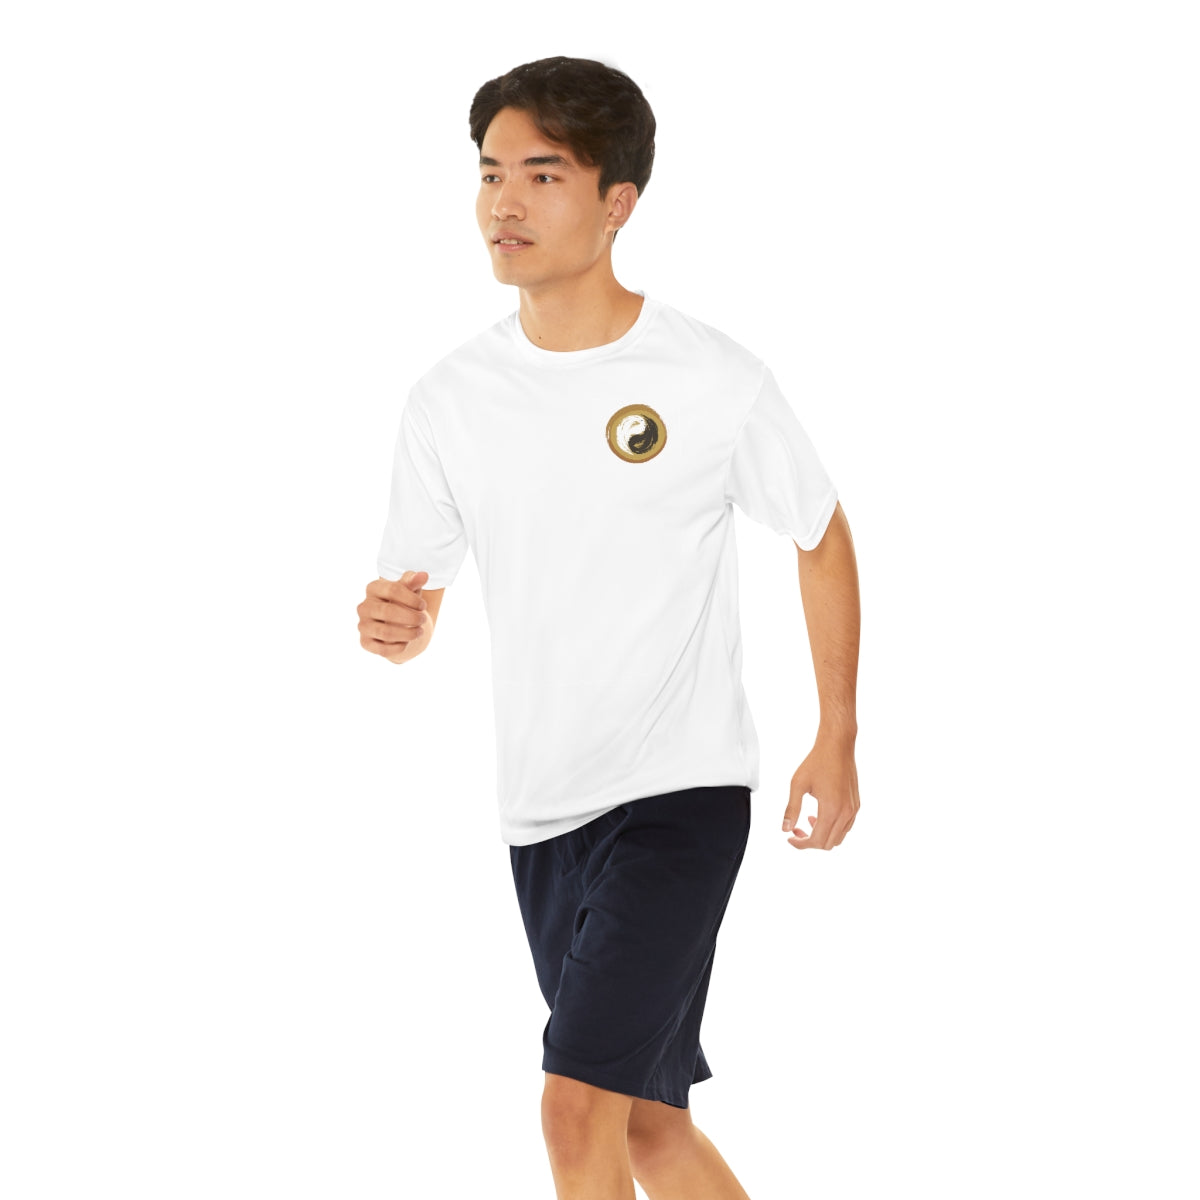 Men's Performance and Yoga T-Shirt - Personal Hour for Yoga and Meditations 